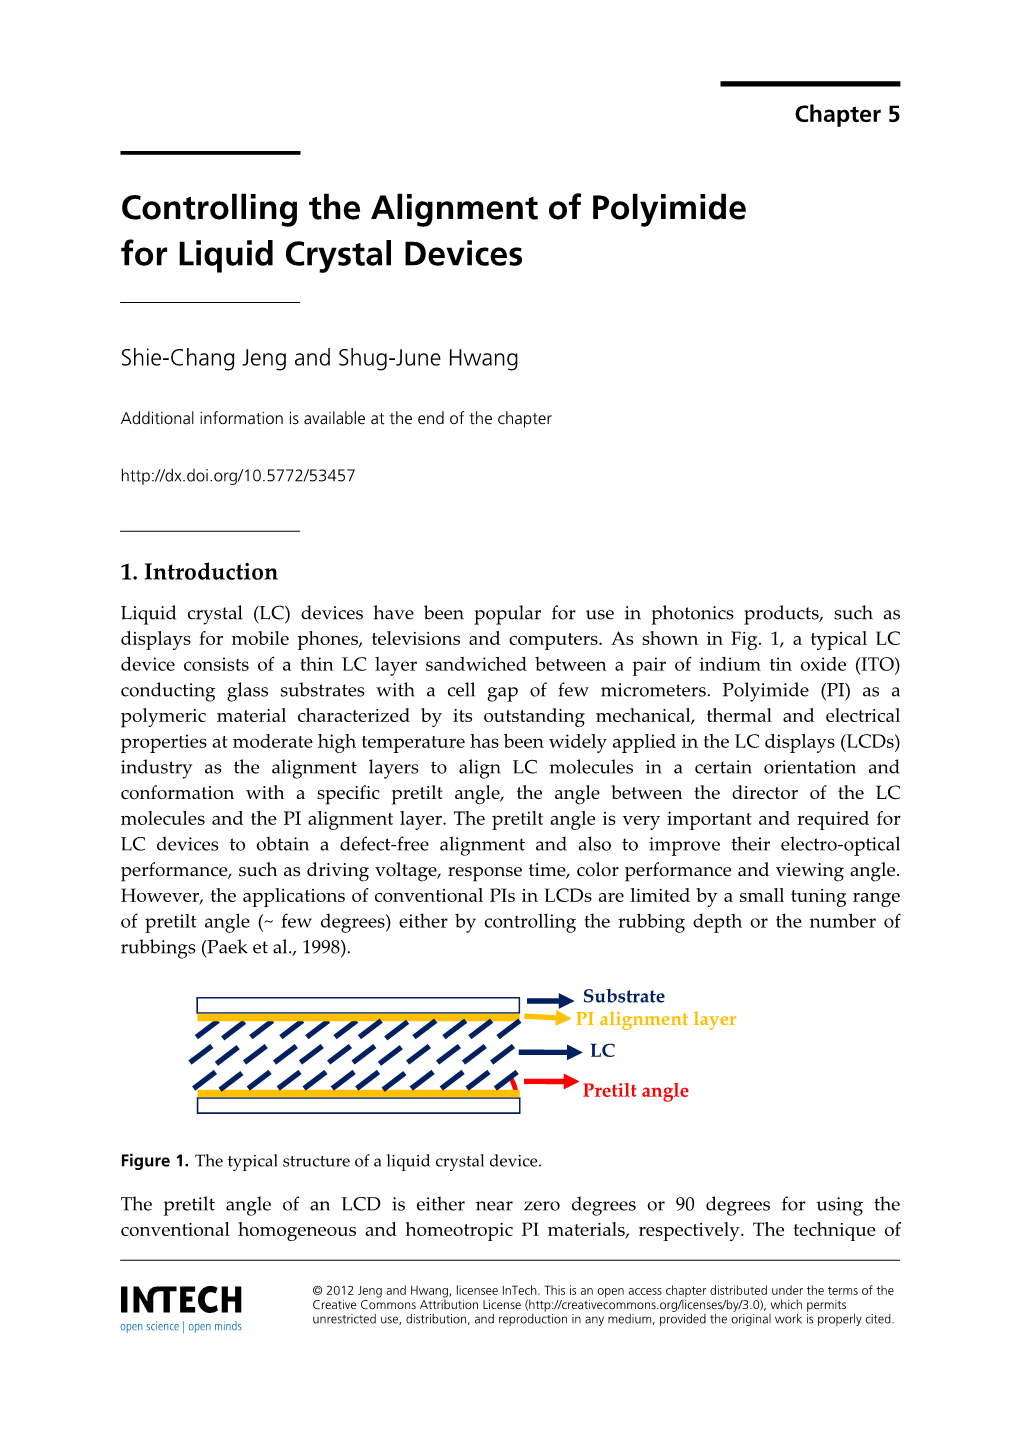 Controlling the Alignment of Polyimide for Liquid Crystal Devices